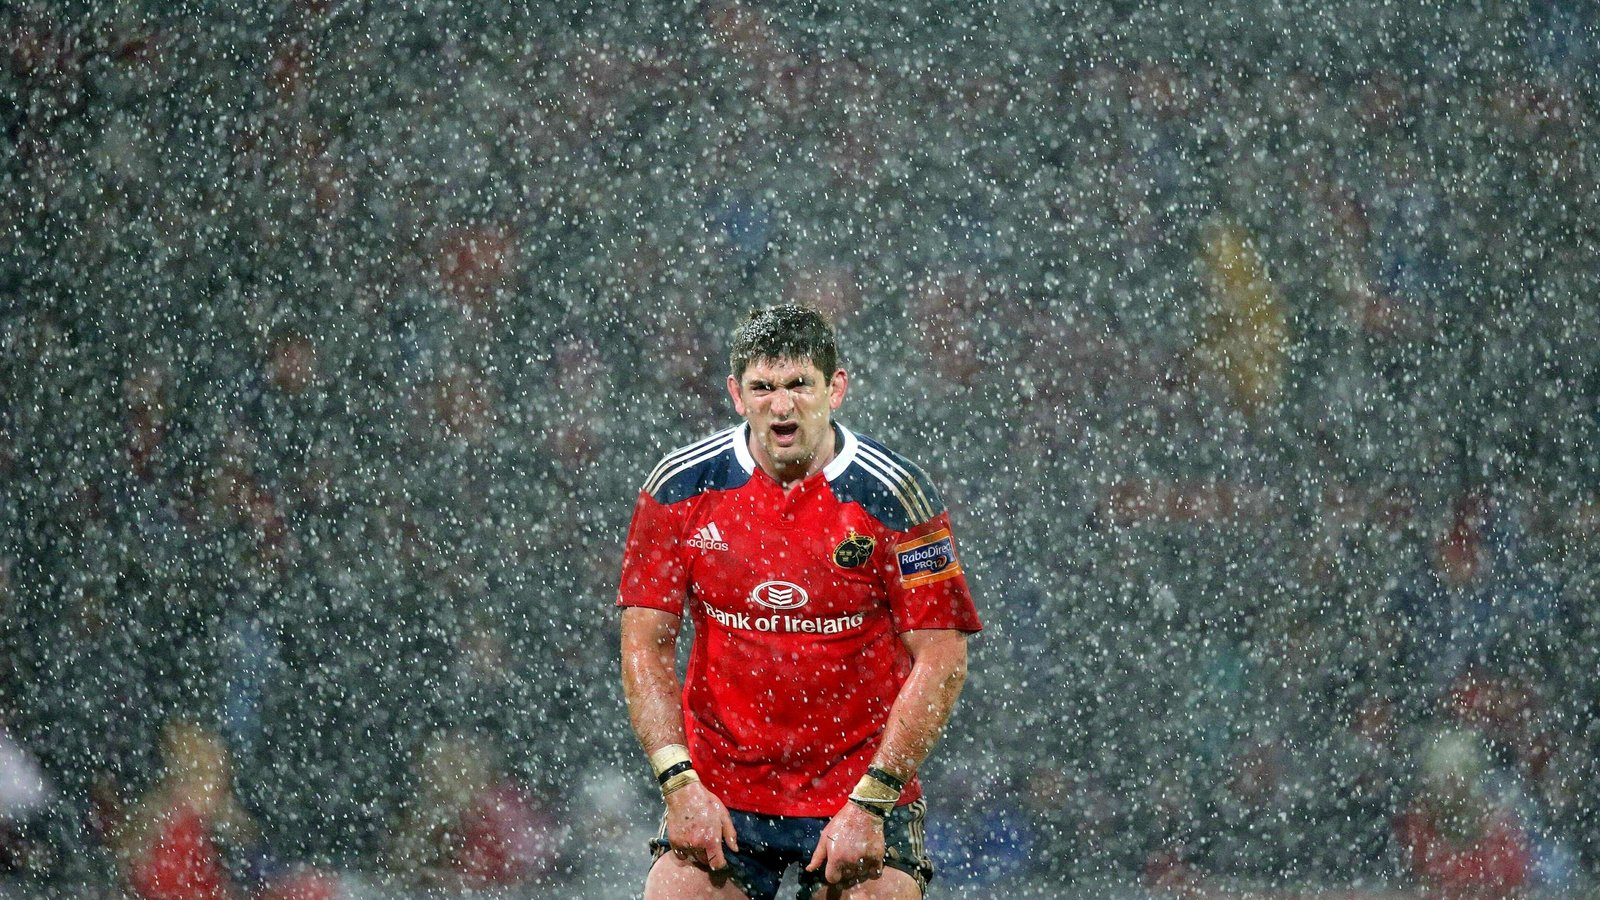 Image - The centre spent two different periods with Munster